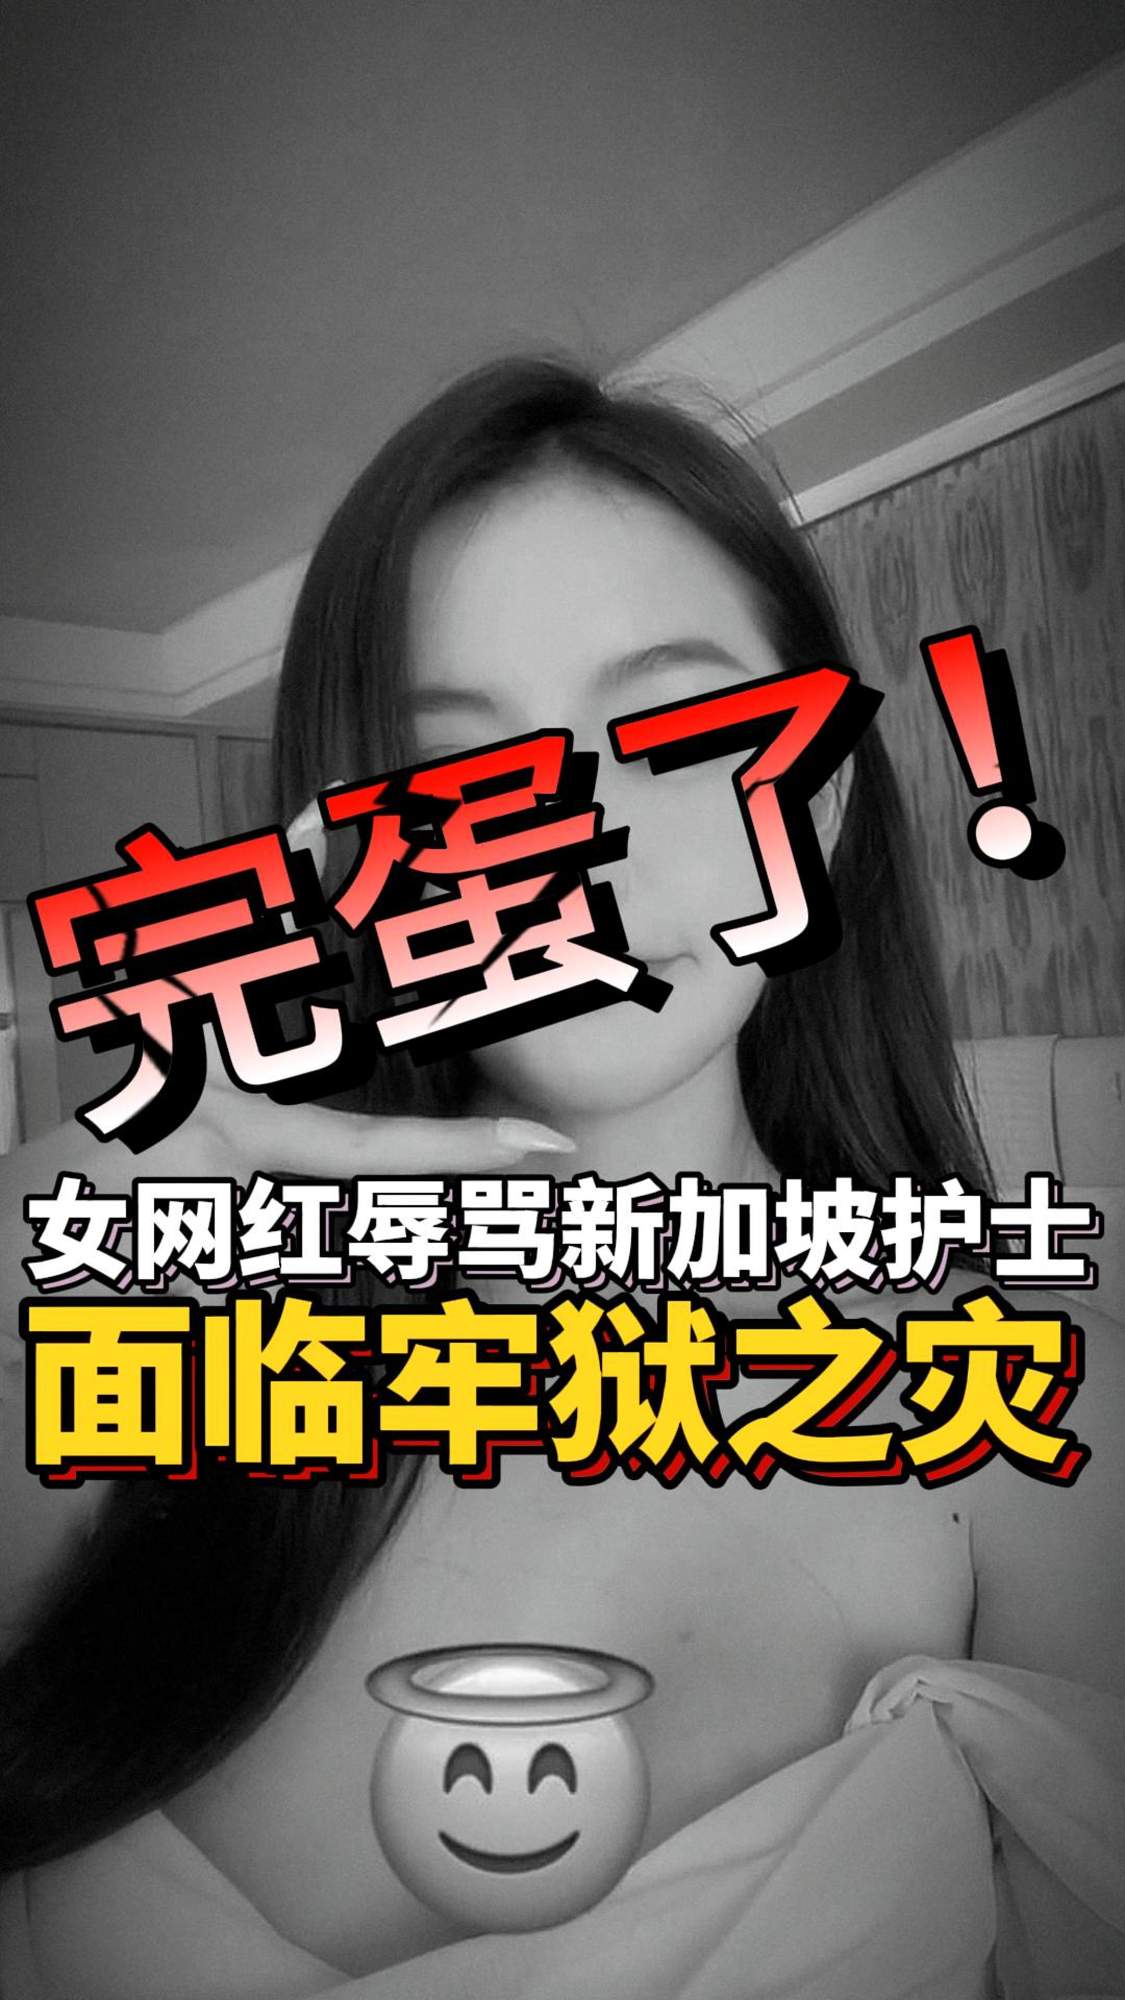 The China National involved in an argument with a Singapore Police Force (SPF) officer has reportedly been remanded as she could not find a bailor. The charges came after videos of the woman's arguments with the police officer emerged on TikTok.